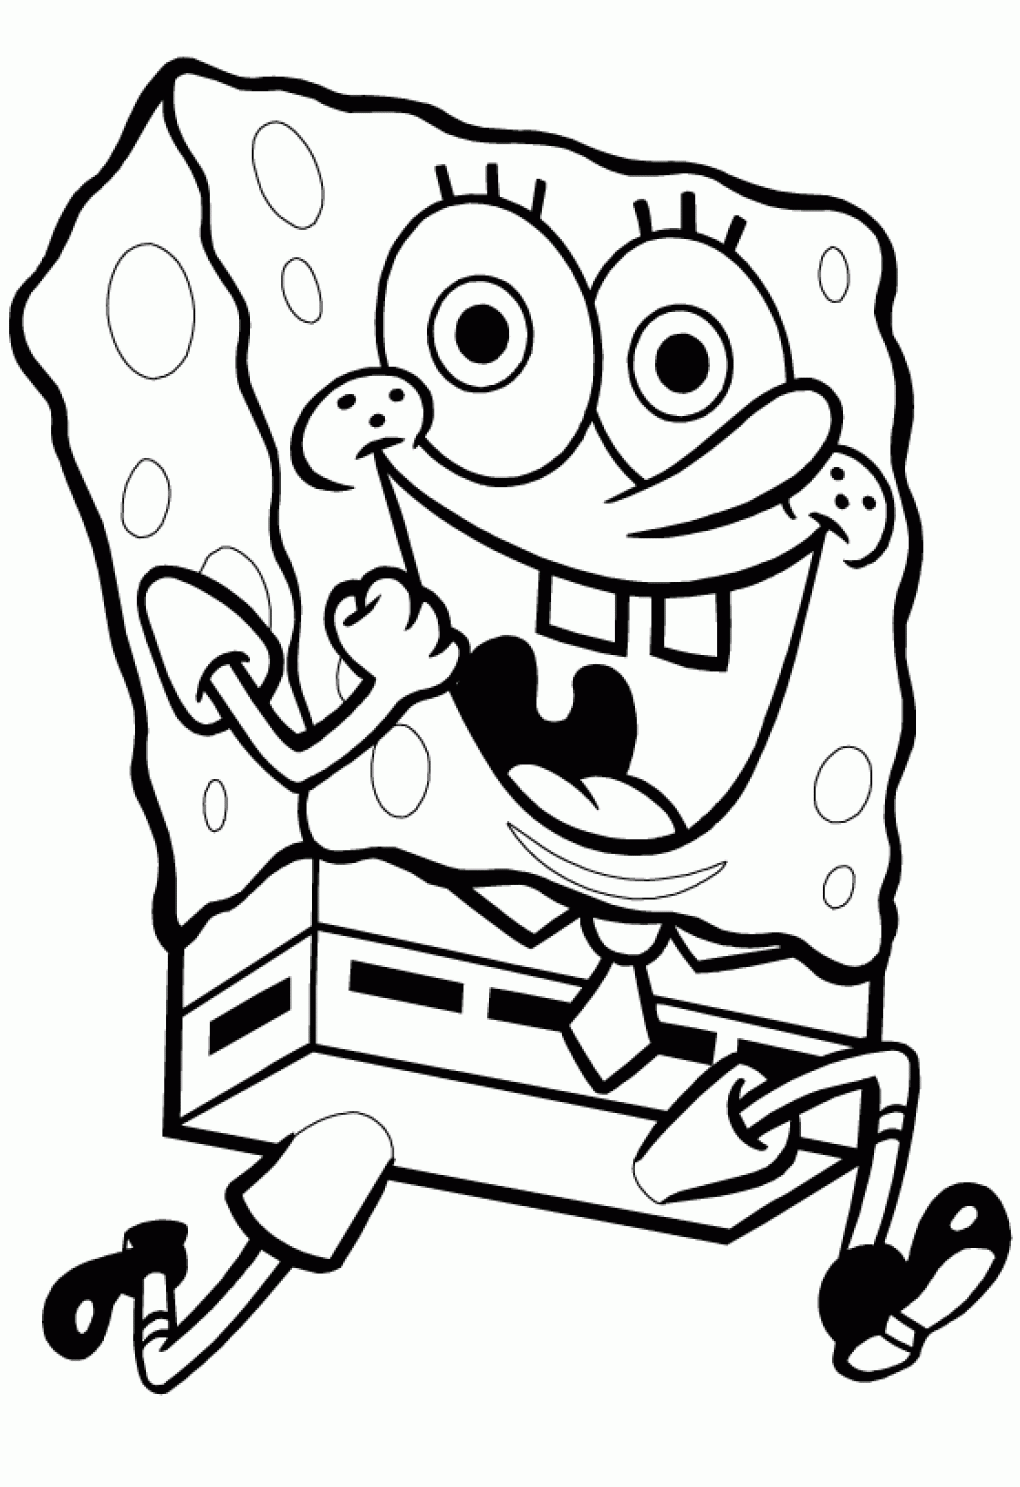 Spongebob is Ready Coloring Pages